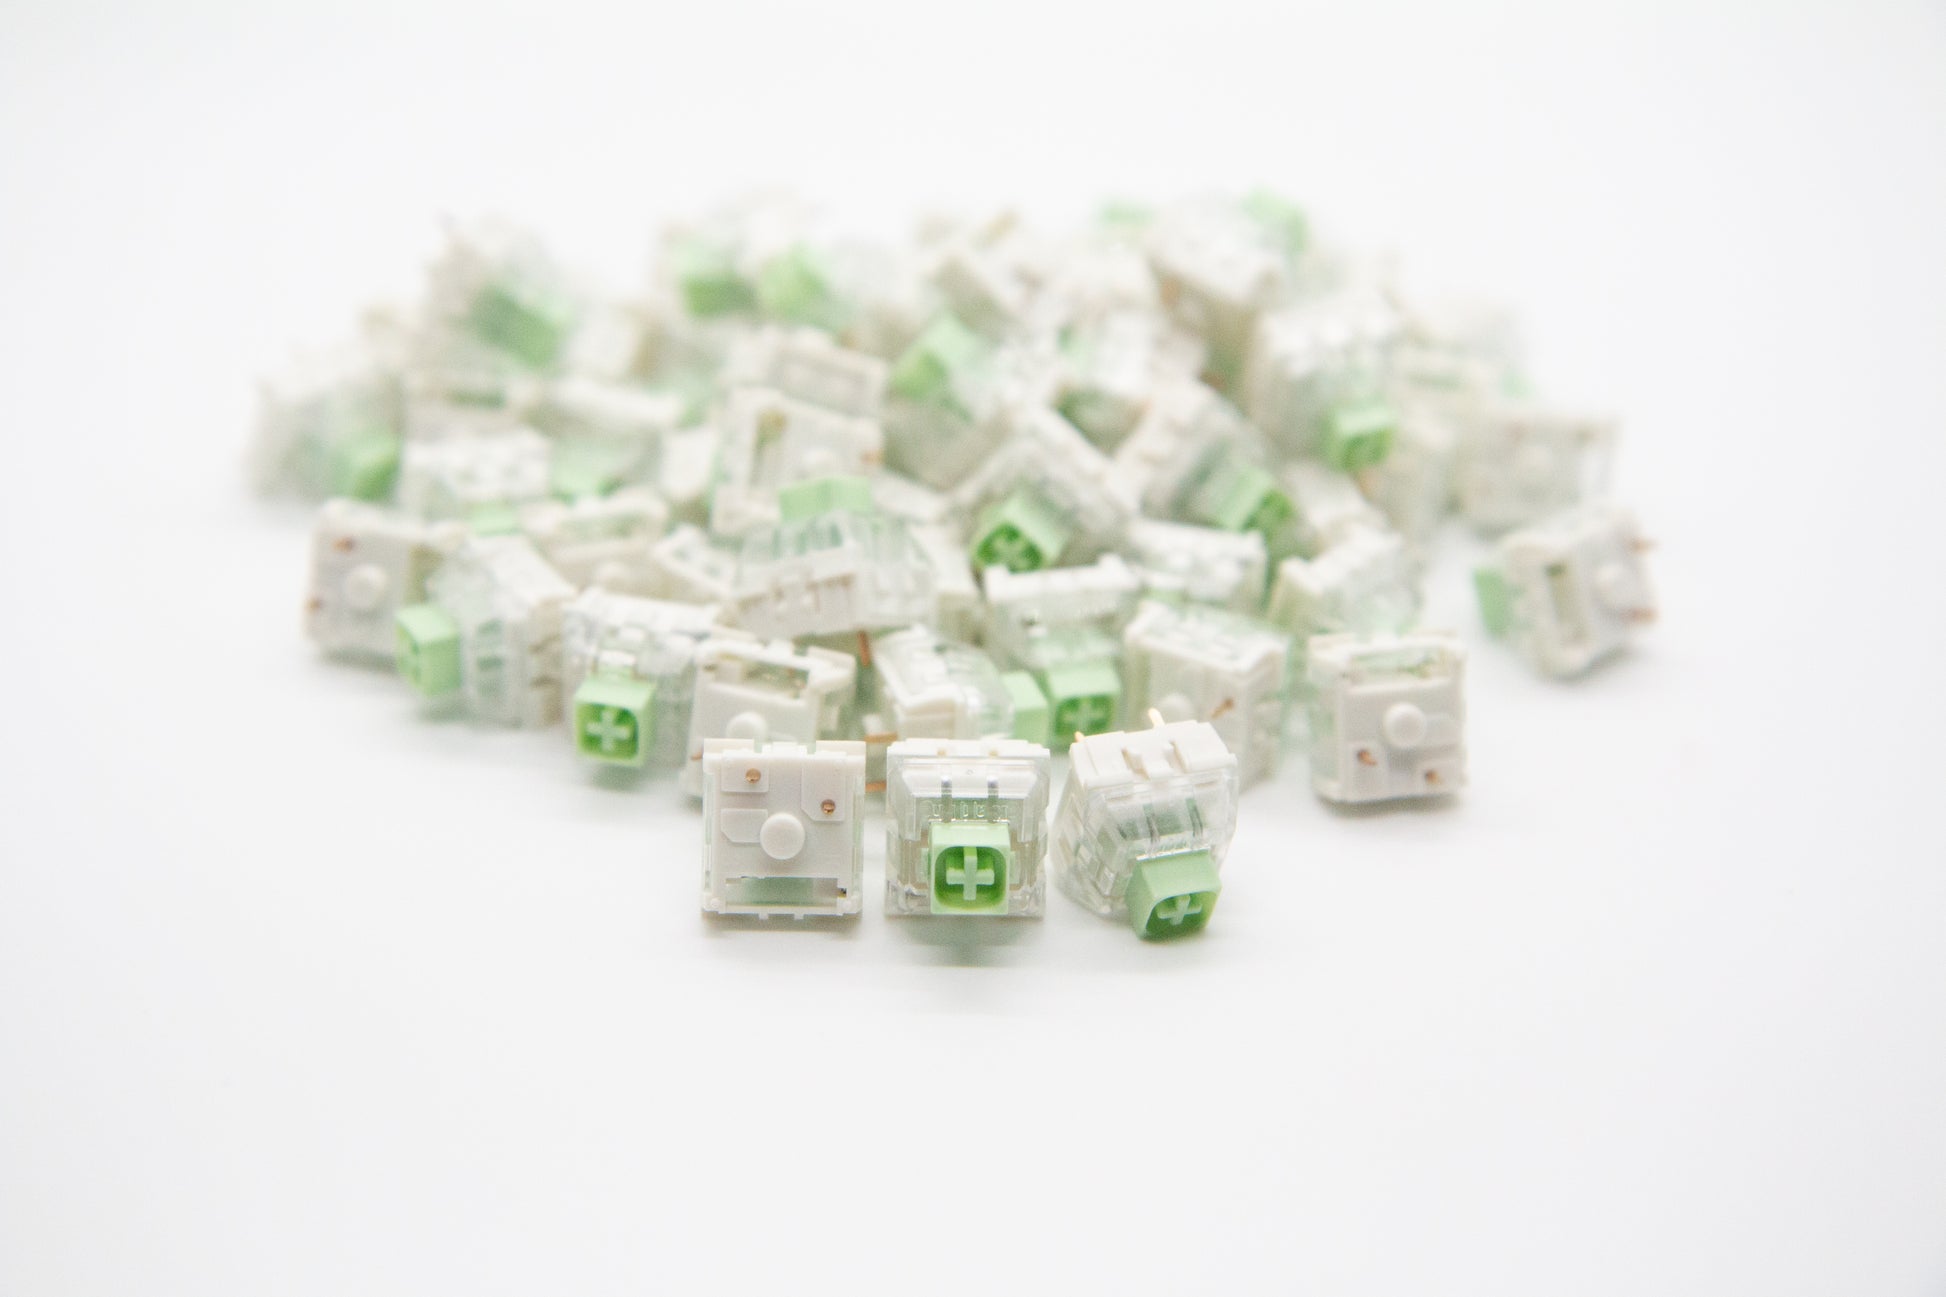 Close-up shot of a pile of Novelkeys x Kailh Box Jade mechanical keyboard switches featuring white and transparent housing and light green stems